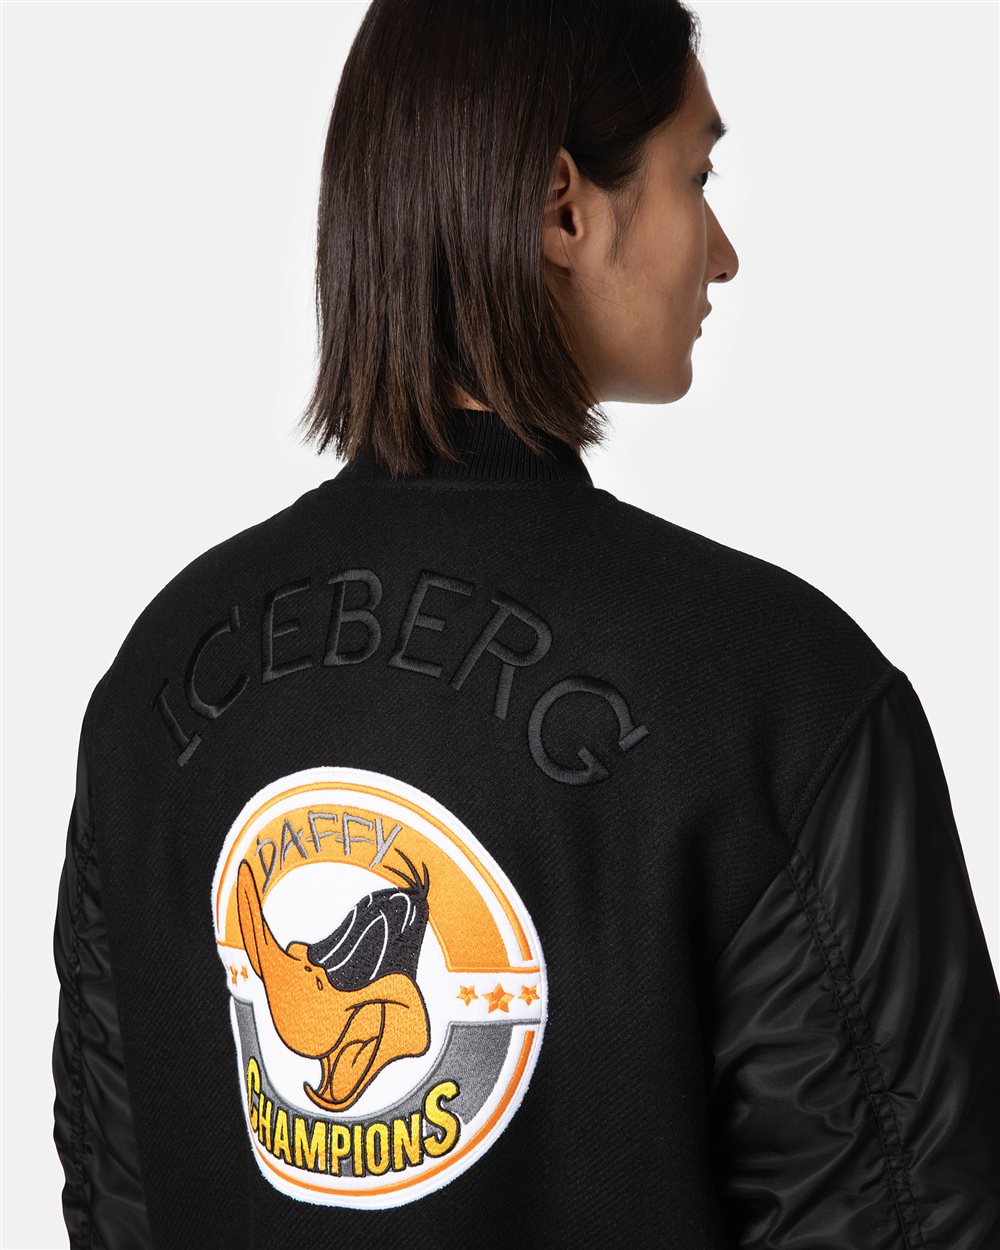 Bomber jacket with Looney Toones patch and logo - Iceberg - Official Website